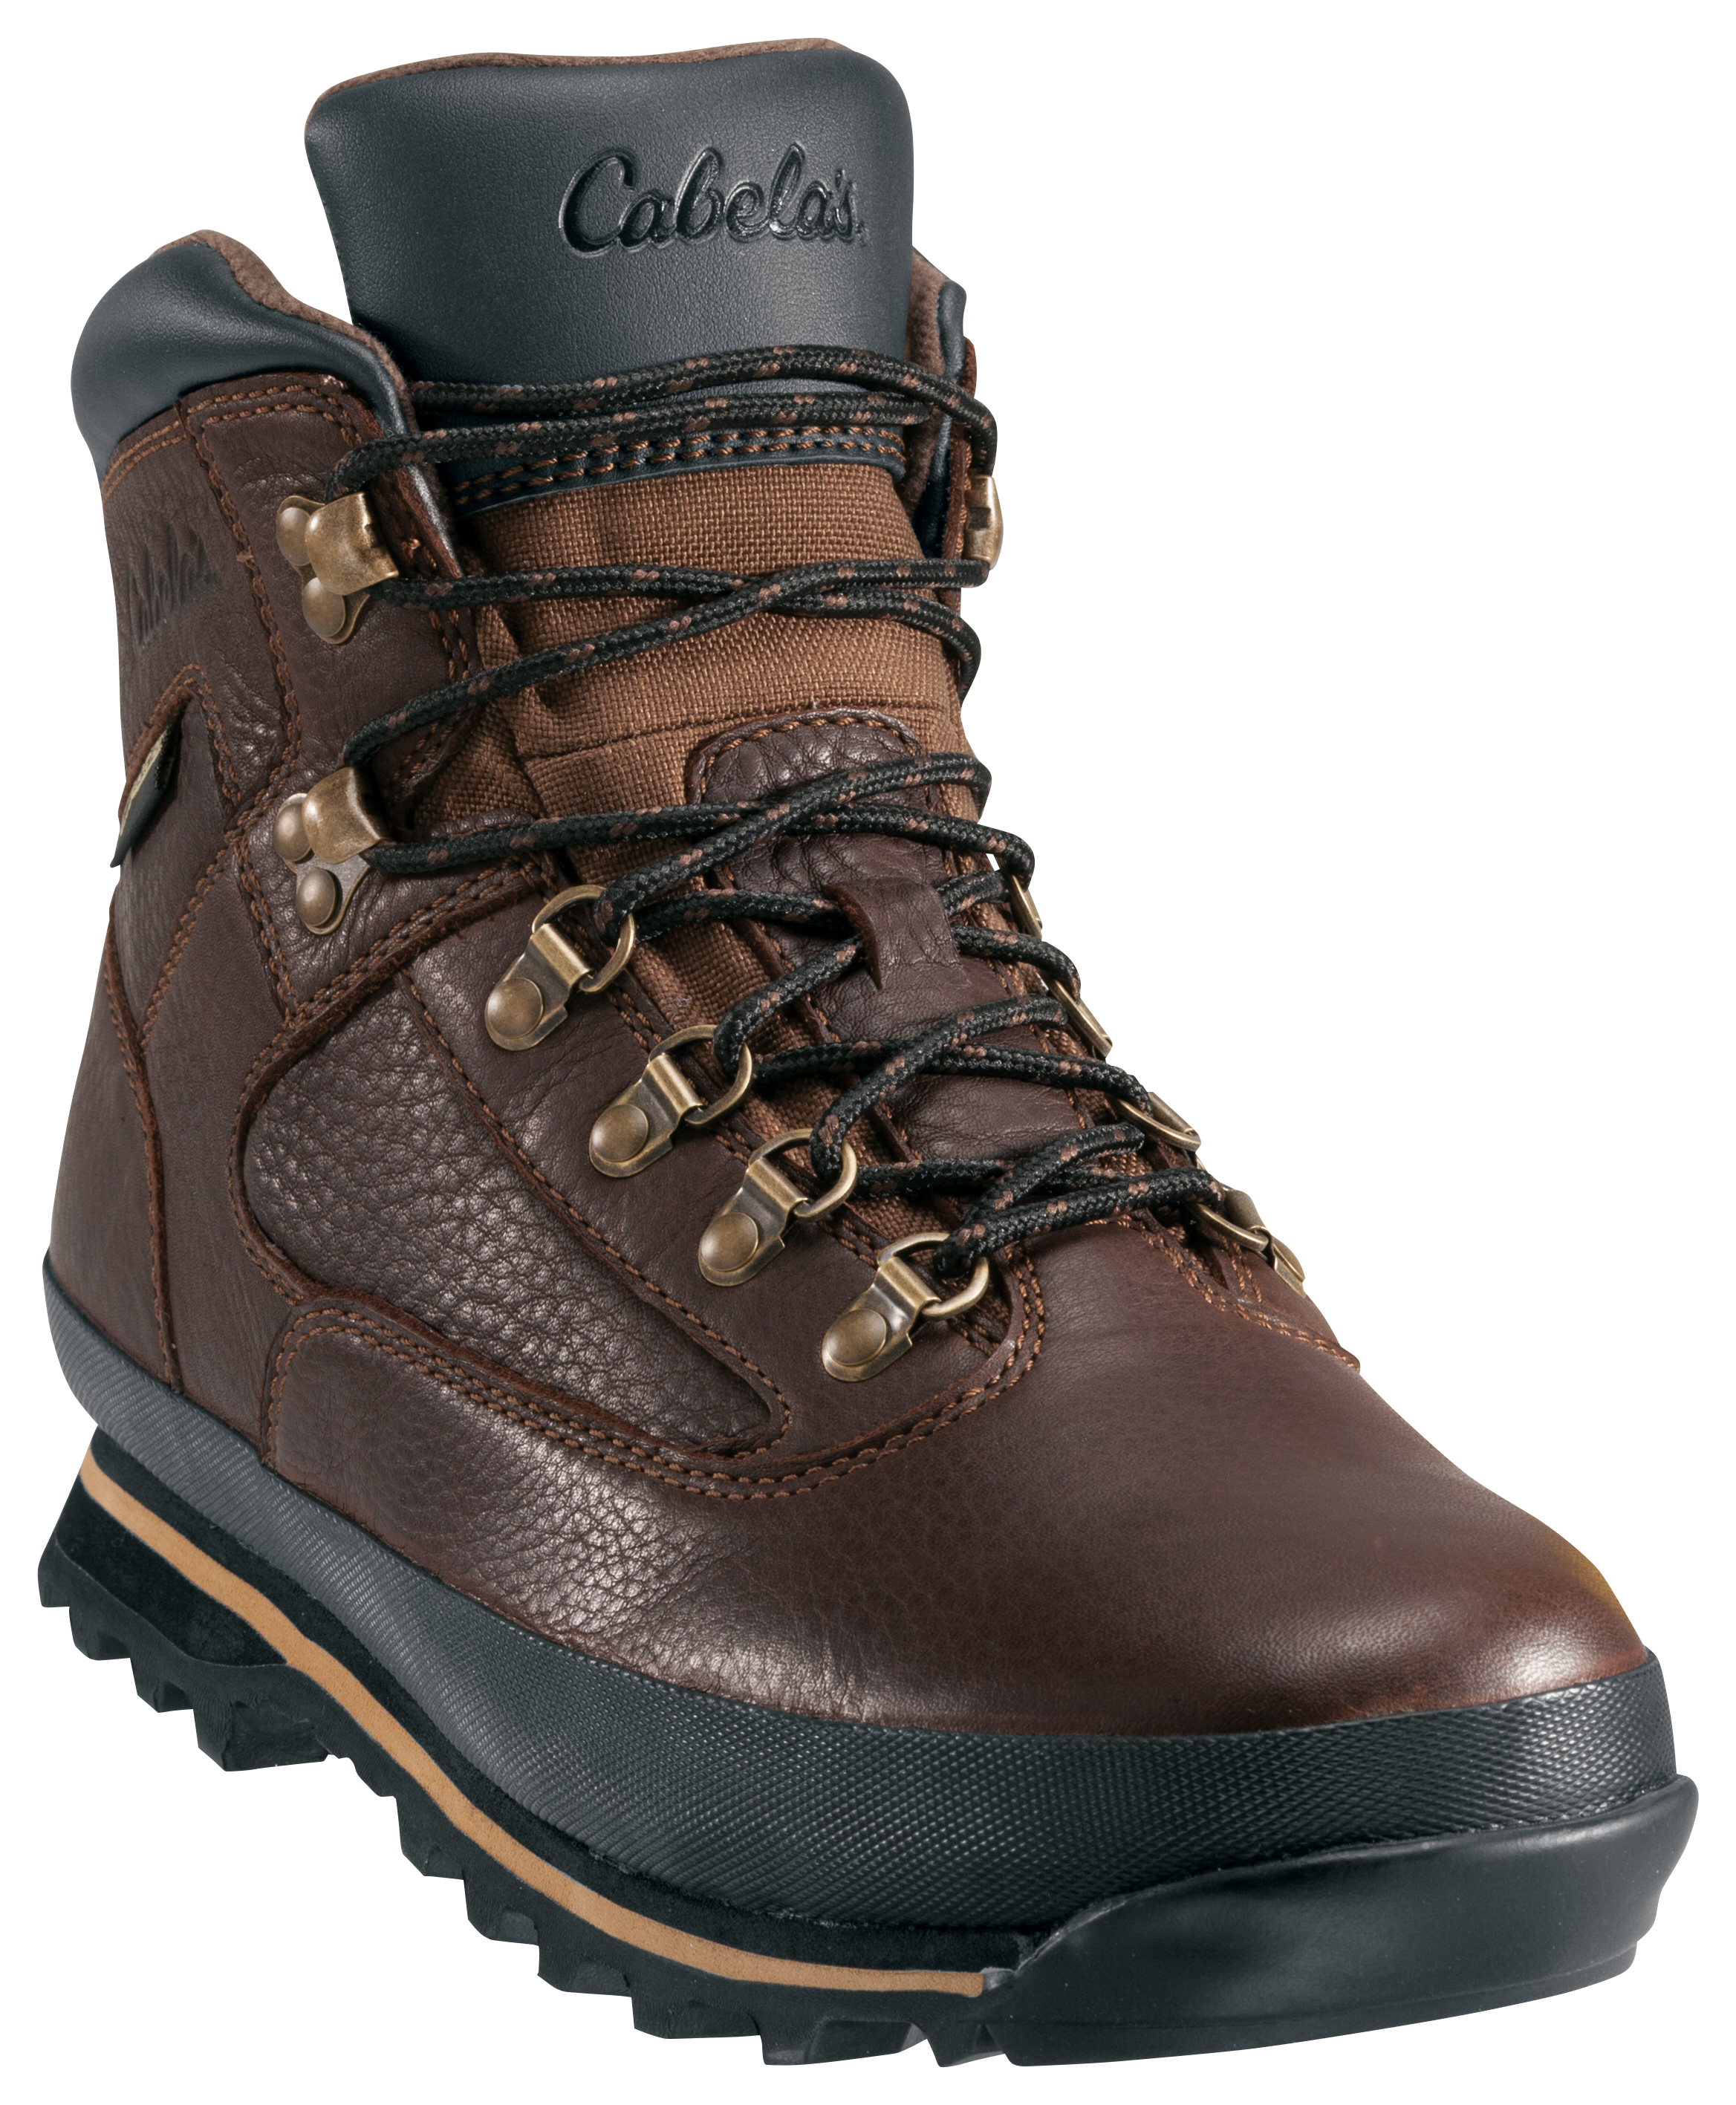 Cabela's Rimrock Mid GORE-TEX Hiking Boots for Men - Brown - 11.5M